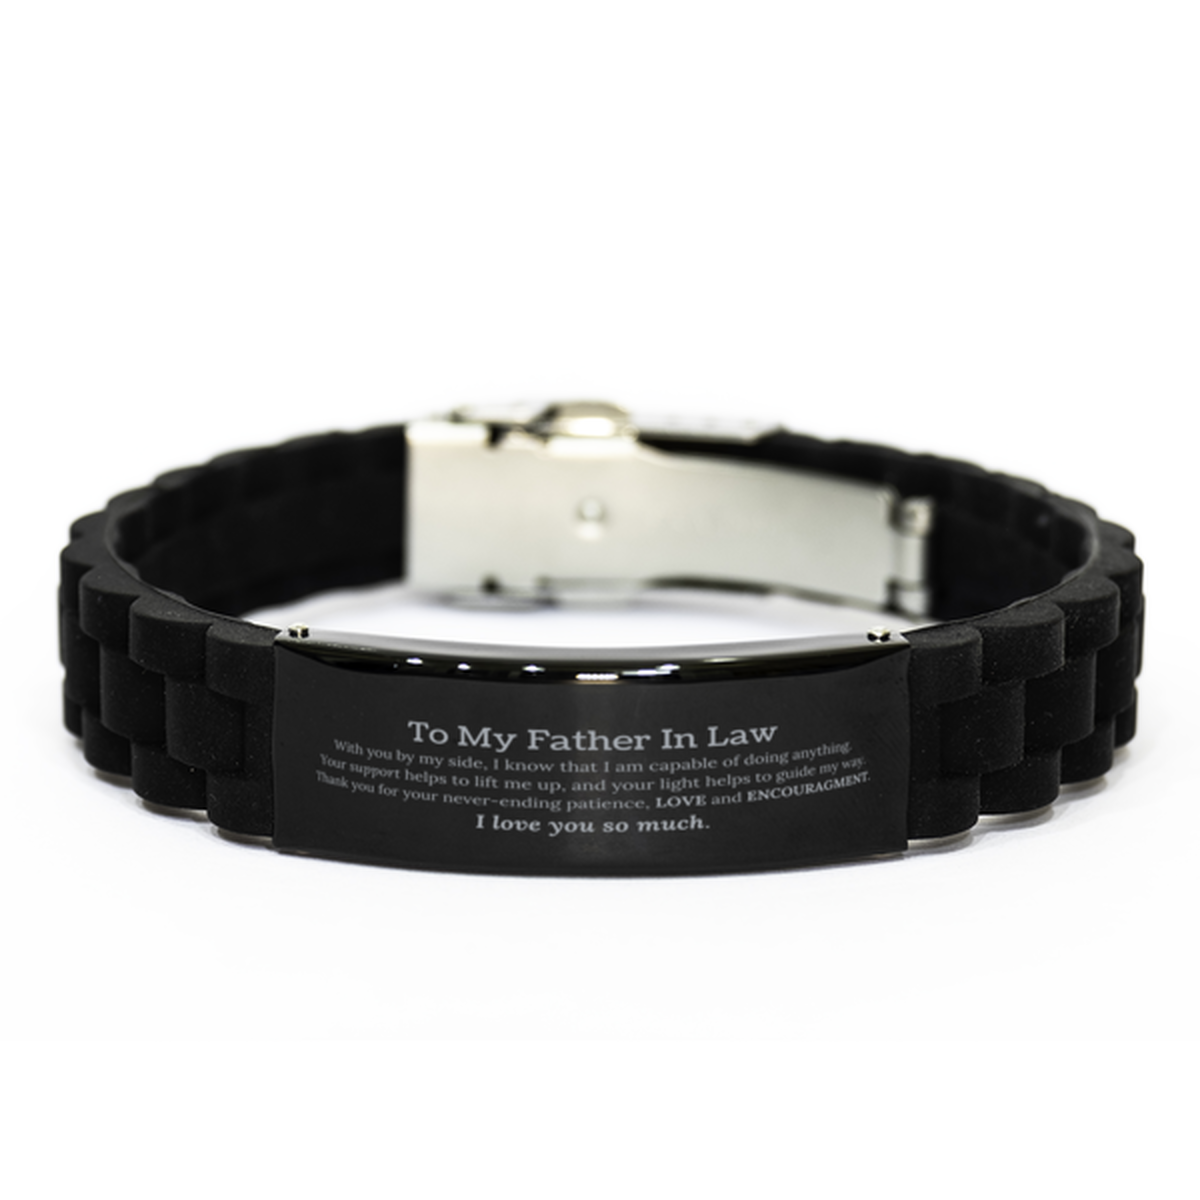 Appreciation Father In Law Black Glidelock Clasp Bracelet Gifts, To My Father In Law Birthday Christmas Wedding Keepsake Gifts for Father In Law With you by my side, I know that I am capable of doing anything. I love you so much